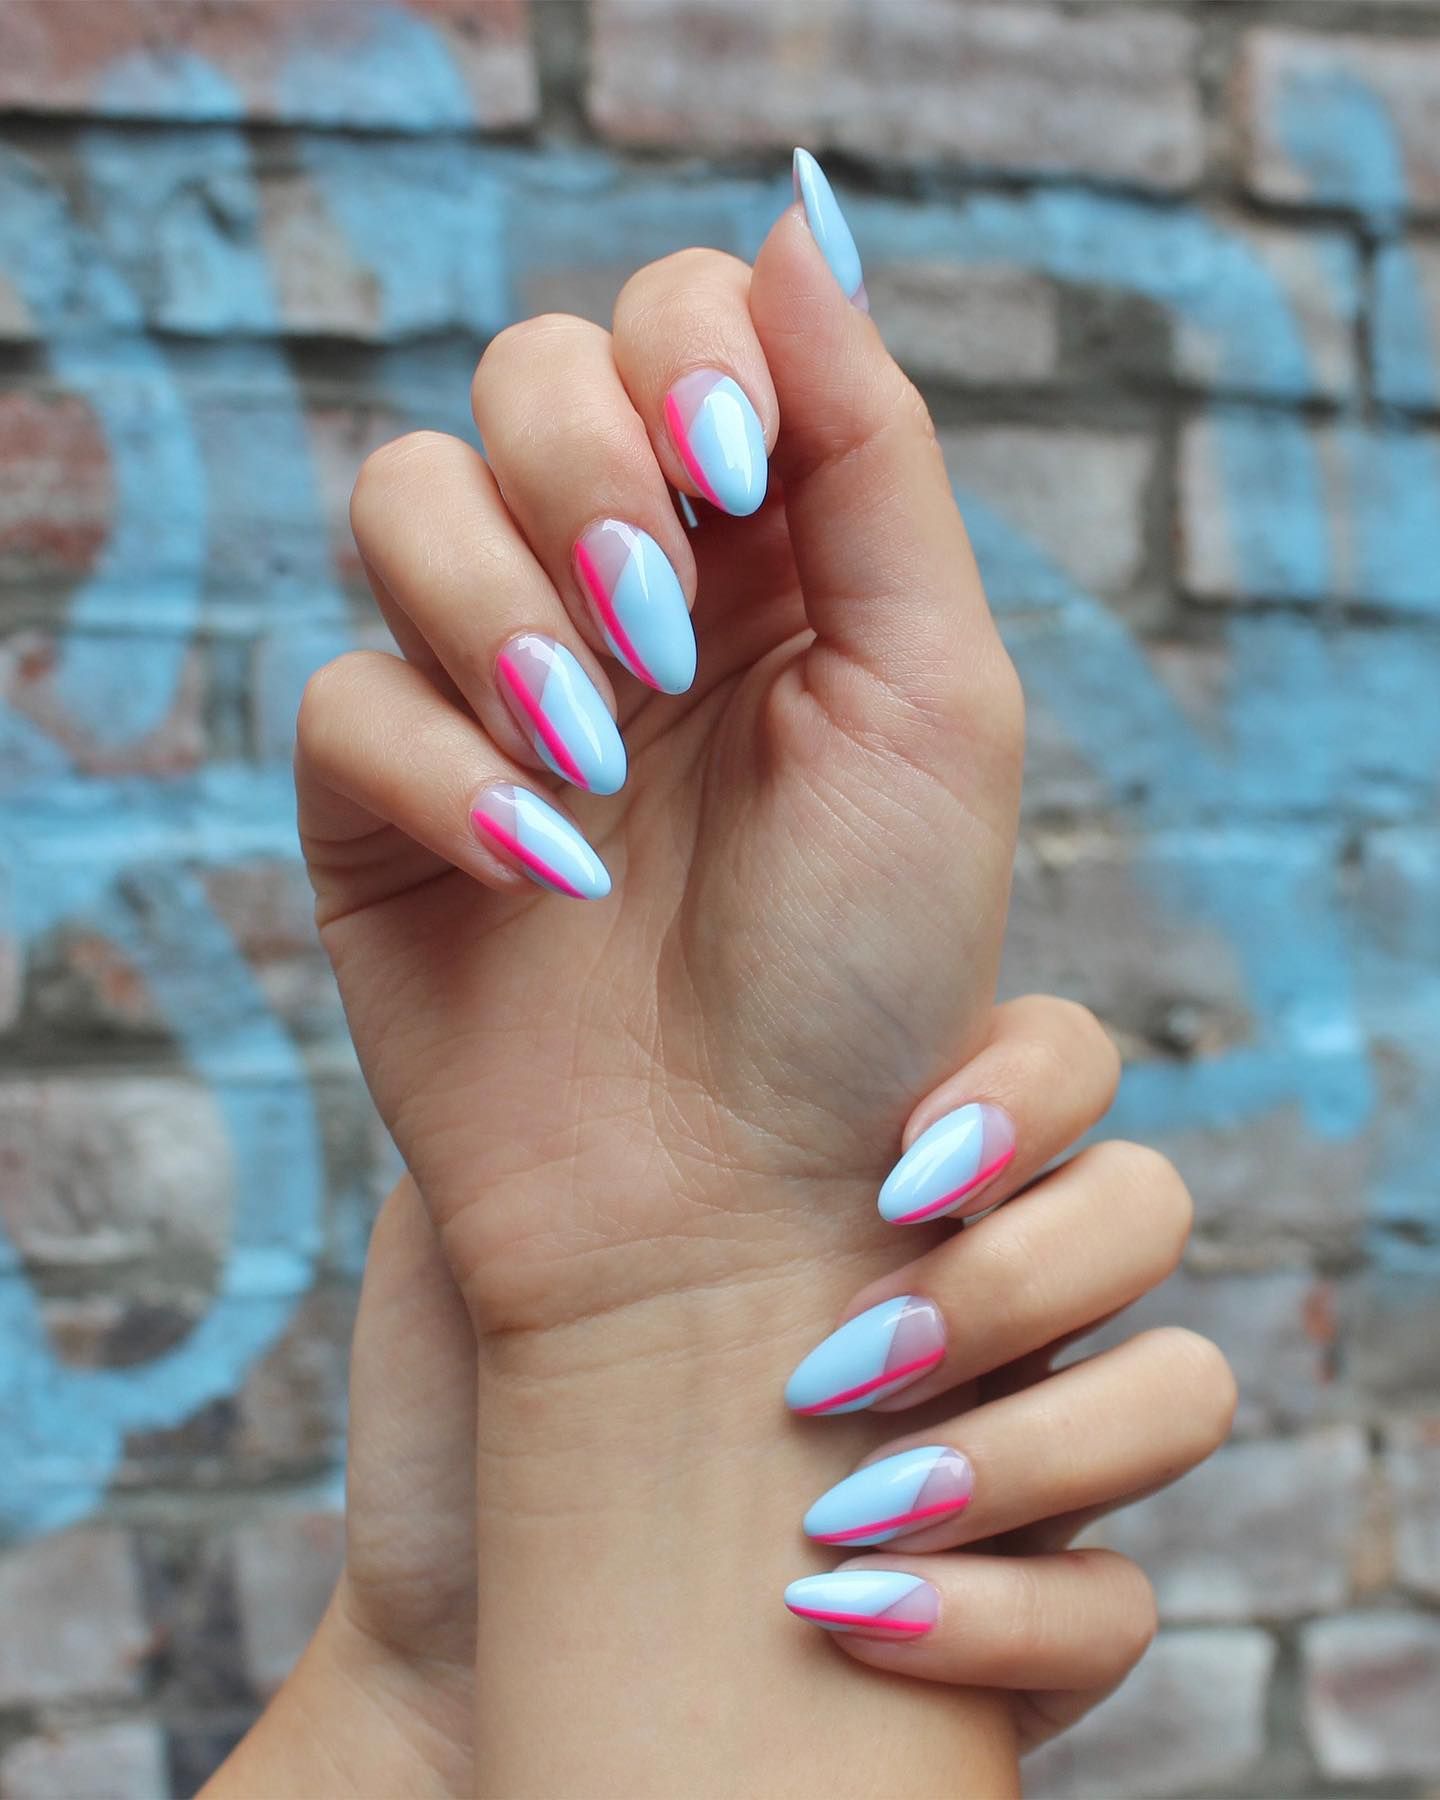 CUTE SIMPLE SUMMER NAILS DESIGNS. Cute simple summer nail designs for you…  | by Selective Nails | Medium